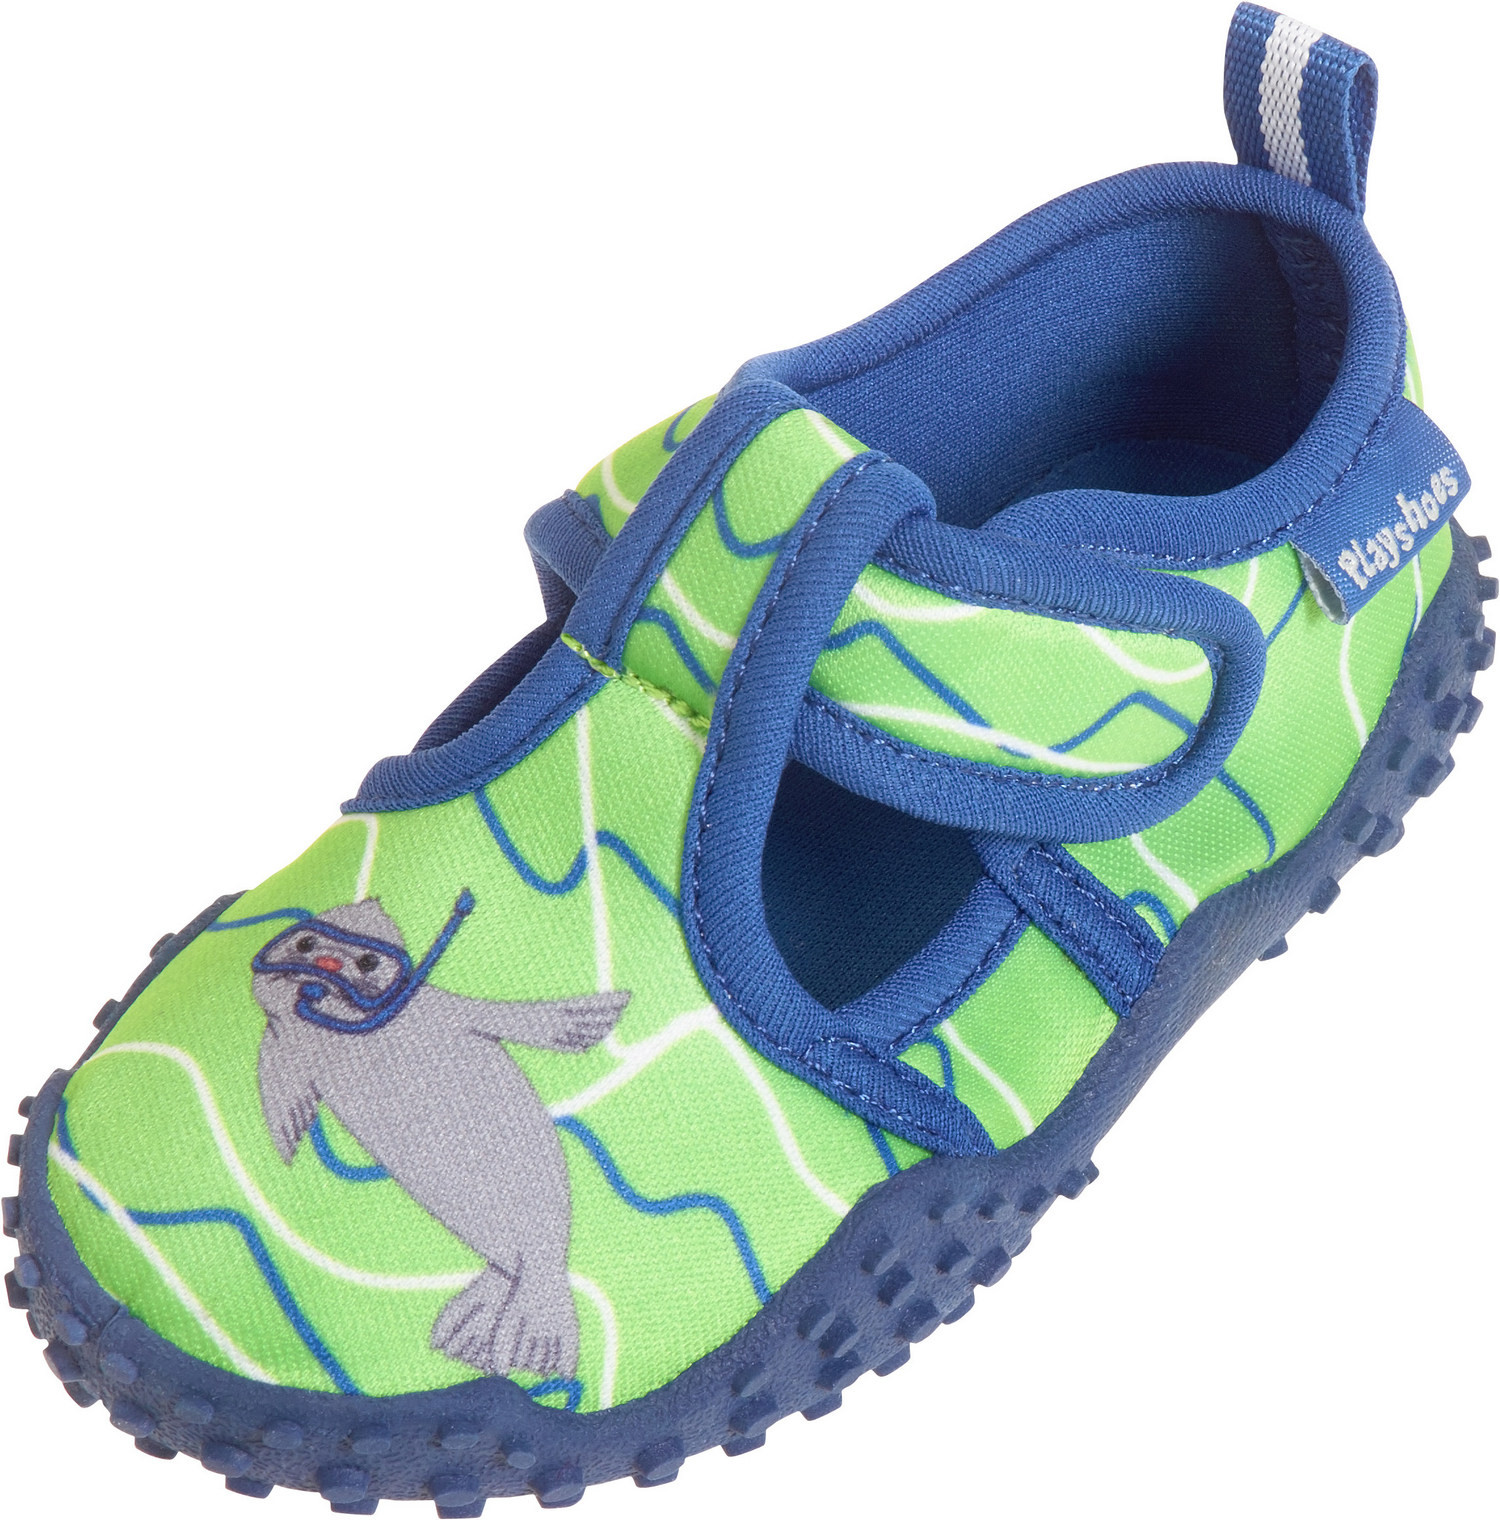 Playshoes - UV water shoes boys and girls - seal - blue/green